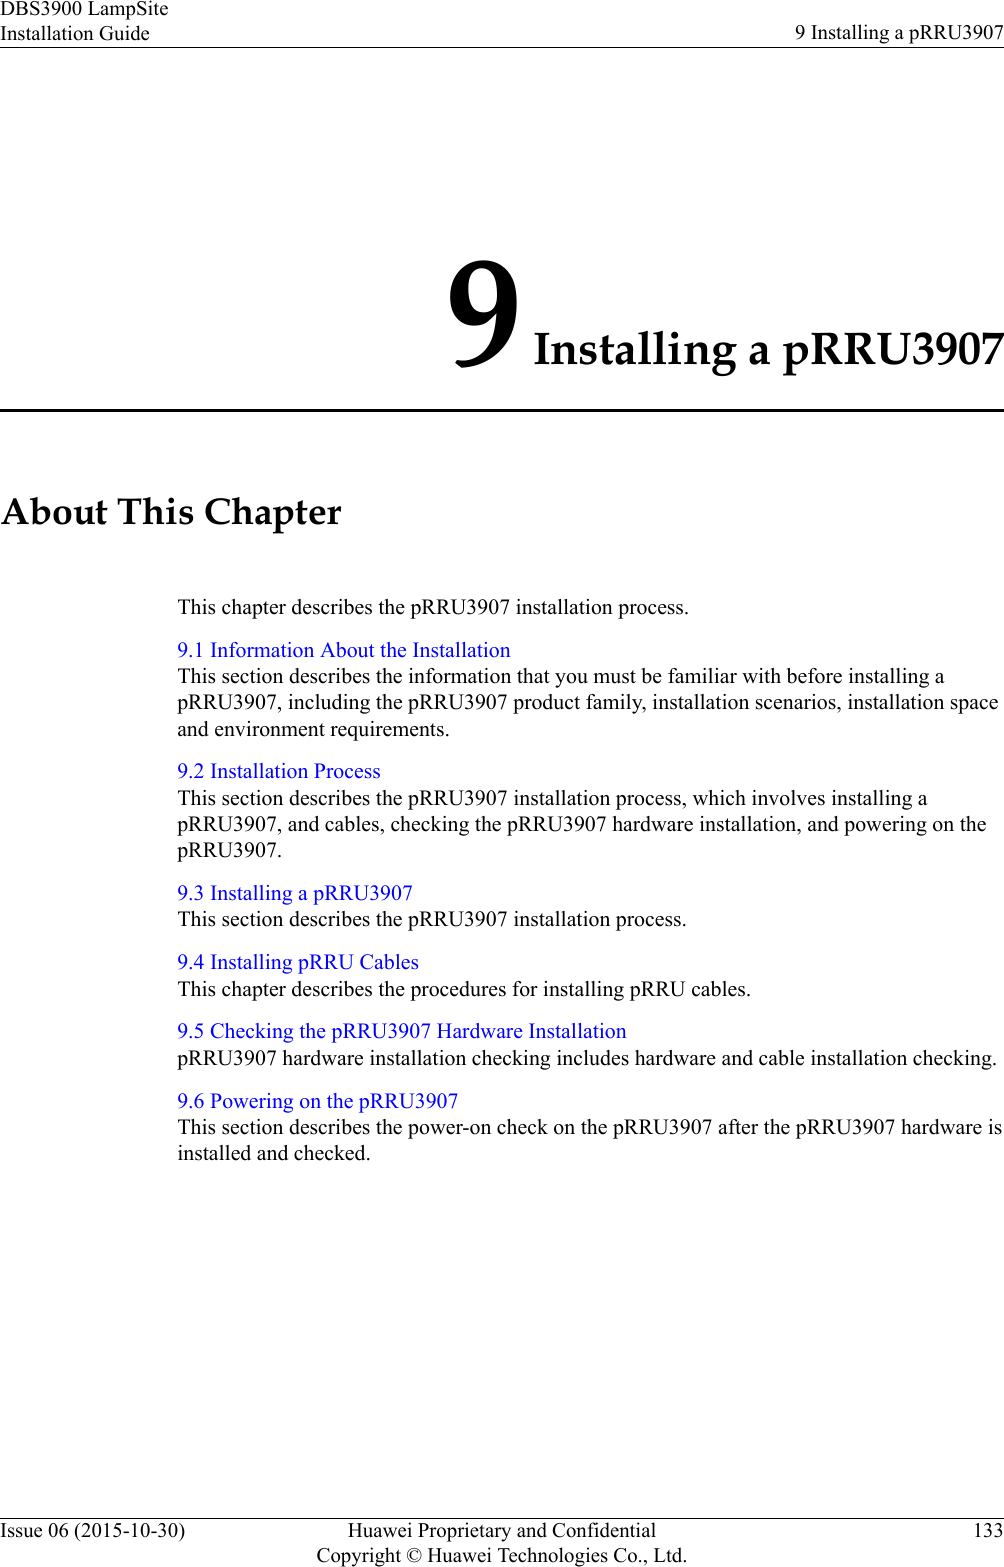 9 Installing a pRRU3907About This ChapterThis chapter describes the pRRU3907 installation process.9.1 Information About the InstallationThis section describes the information that you must be familiar with before installing apRRU3907, including the pRRU3907 product family, installation scenarios, installation spaceand environment requirements.9.2 Installation ProcessThis section describes the pRRU3907 installation process, which involves installing apRRU3907, and cables, checking the pRRU3907 hardware installation, and powering on thepRRU3907.9.3 Installing a pRRU3907This section describes the pRRU3907 installation process.9.4 Installing pRRU CablesThis chapter describes the procedures for installing pRRU cables.9.5 Checking the pRRU3907 Hardware InstallationpRRU3907 hardware installation checking includes hardware and cable installation checking.9.6 Powering on the pRRU3907This section describes the power-on check on the pRRU3907 after the pRRU3907 hardware isinstalled and checked.DBS3900 LampSiteInstallation Guide 9 Installing a pRRU3907Issue 06 (2015-10-30) Huawei Proprietary and ConfidentialCopyright © Huawei Technologies Co., Ltd.133